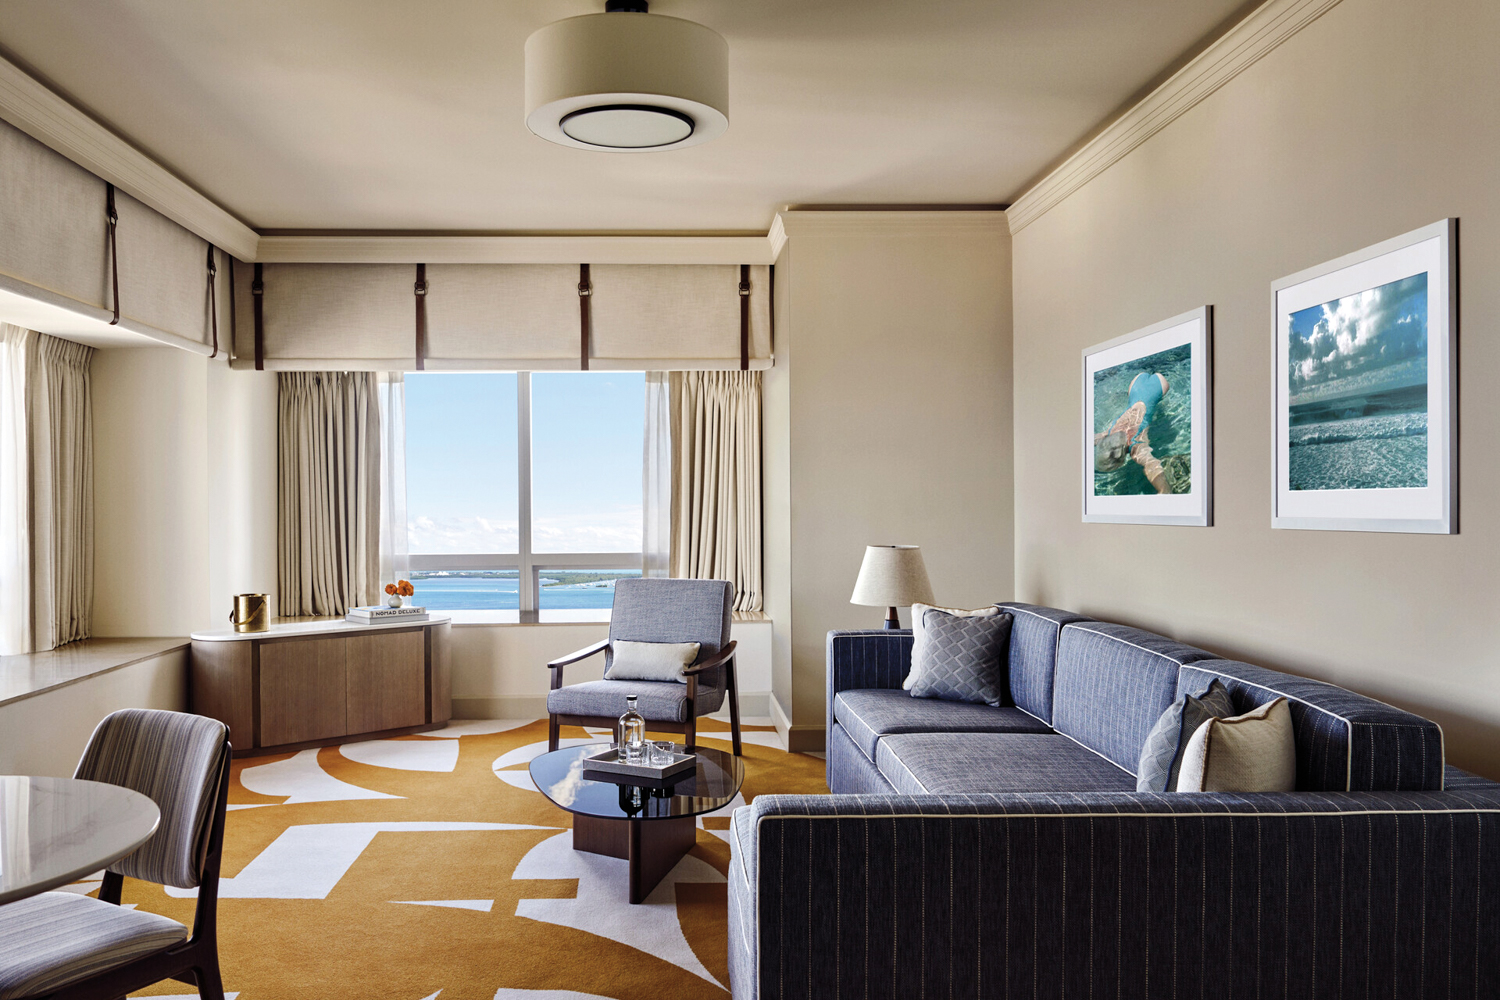 Cream walls provide a backdrop for the midcentury-style pieces in the Four Seasons Hotel Miami